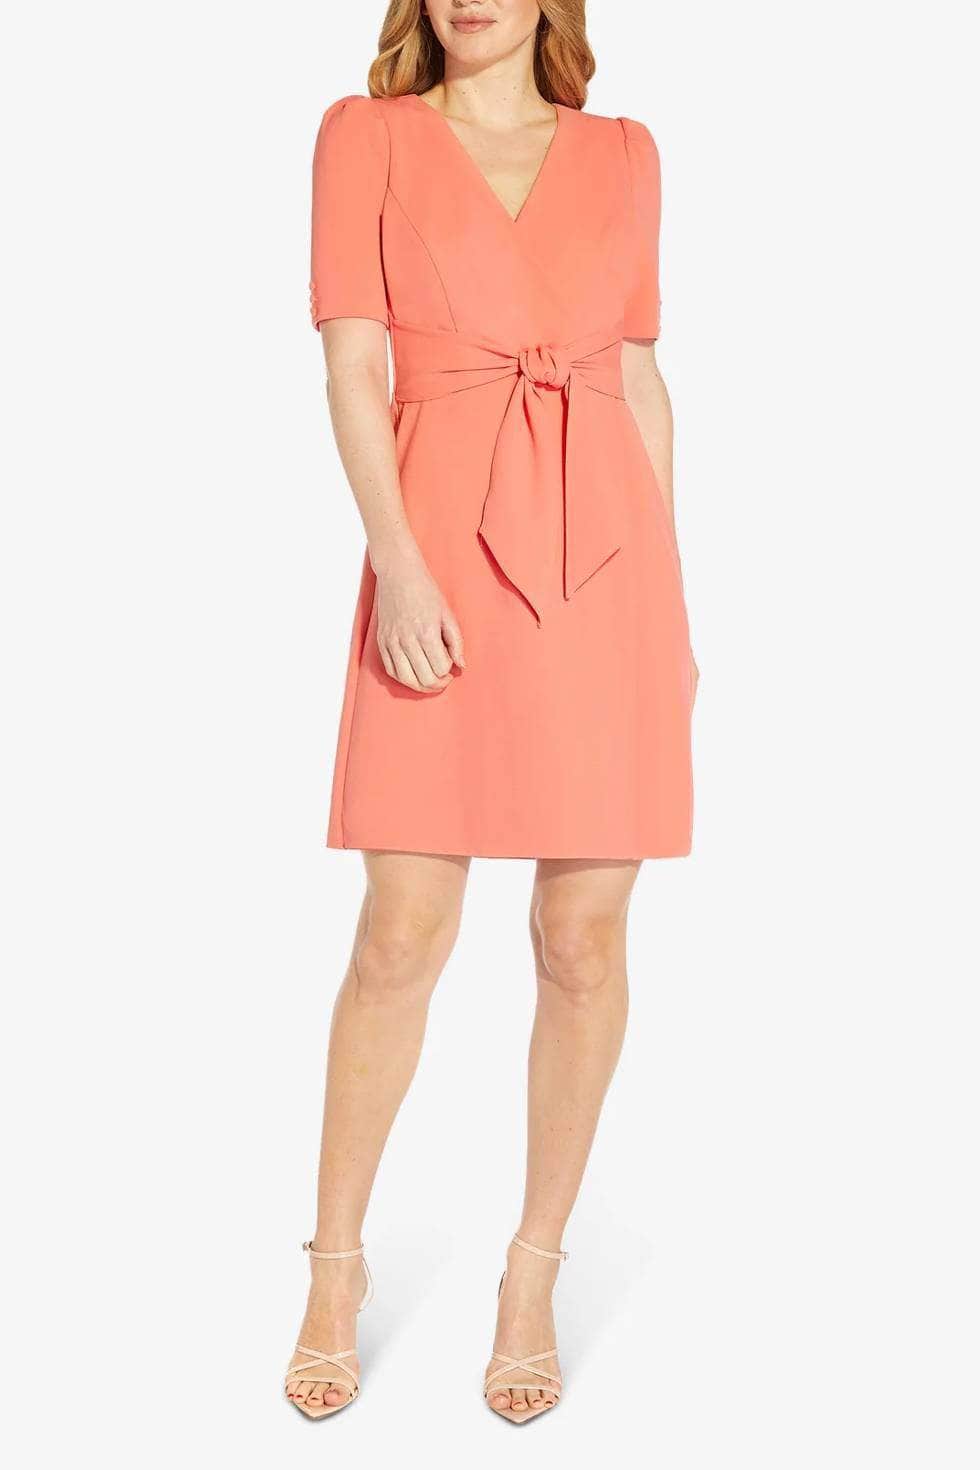 Image of Adrianna Papell AP1D104632 - V-Neck Short Sleeve Cocktail Dress